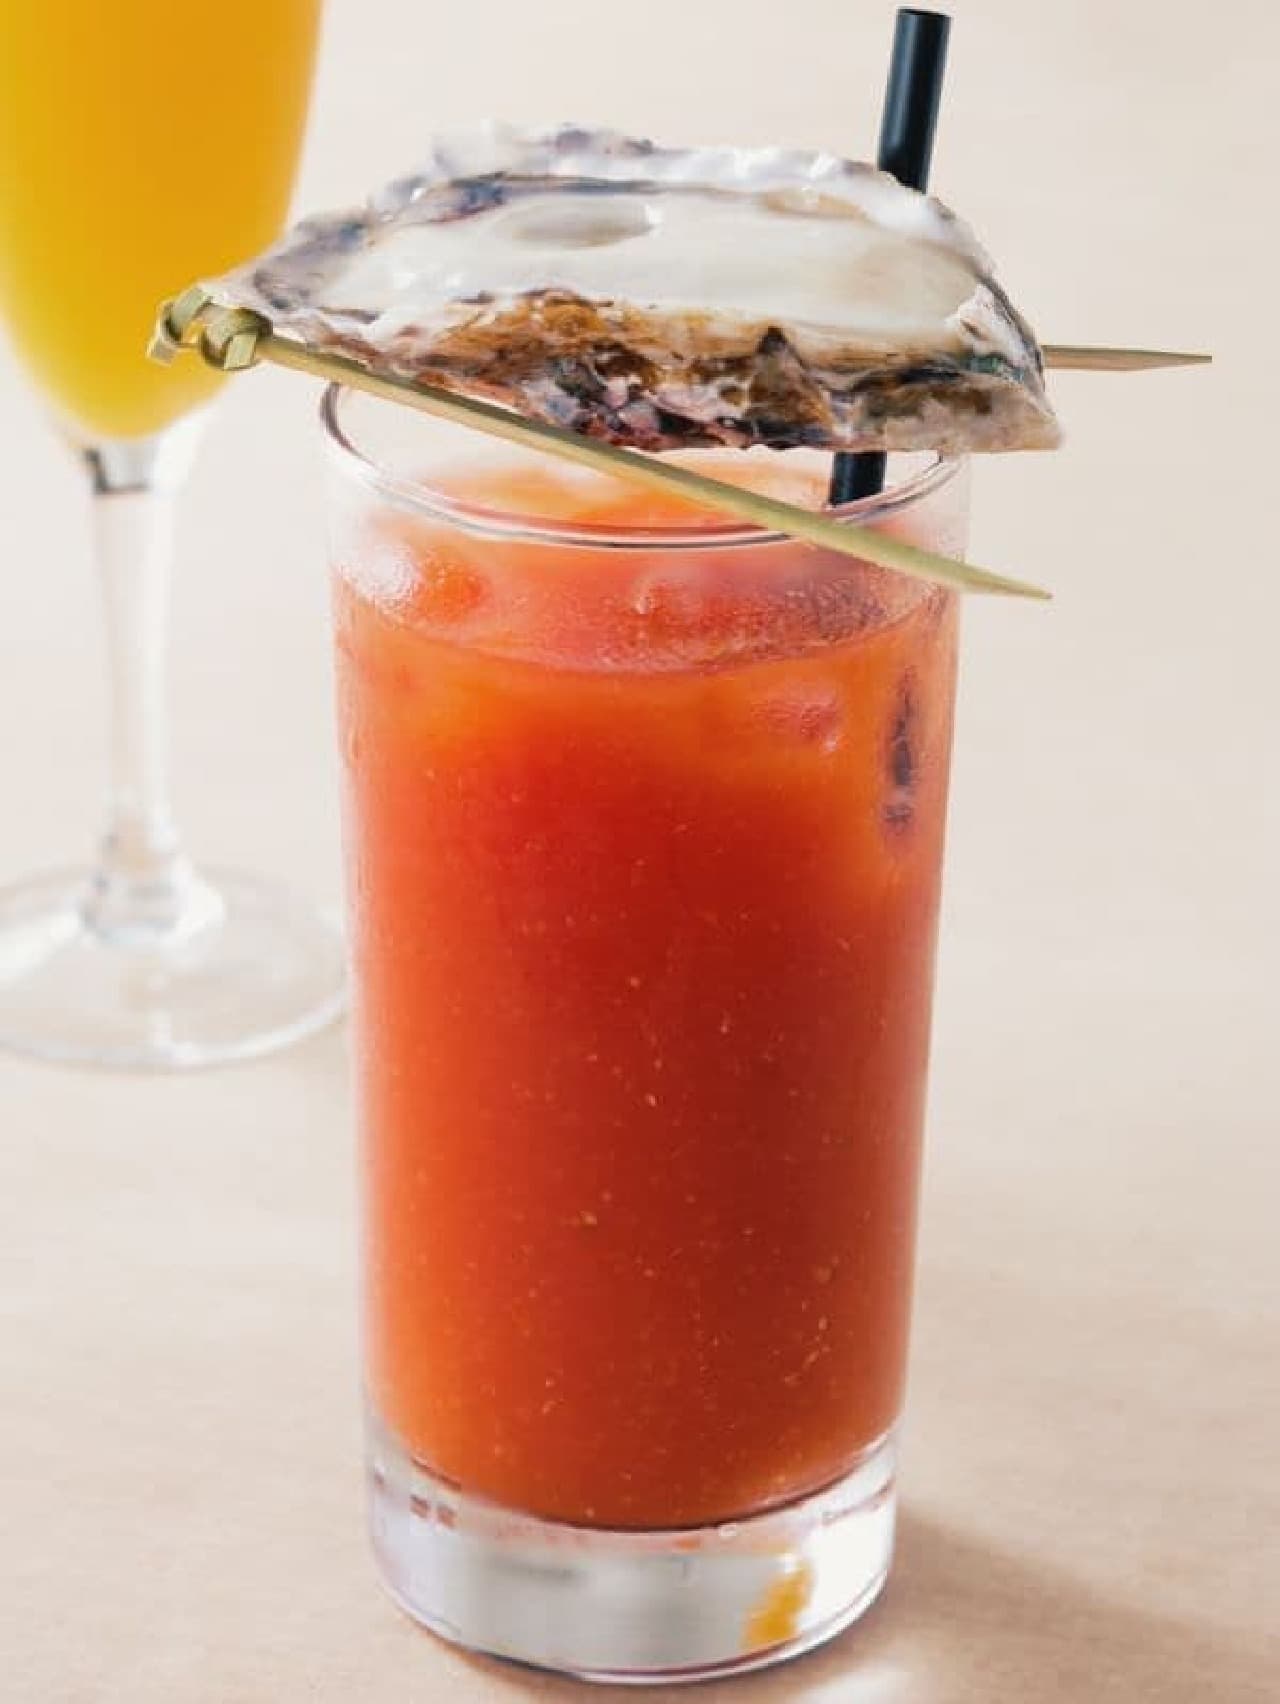 Buttermilk Channel "Star of the Sea Bloody Mary"